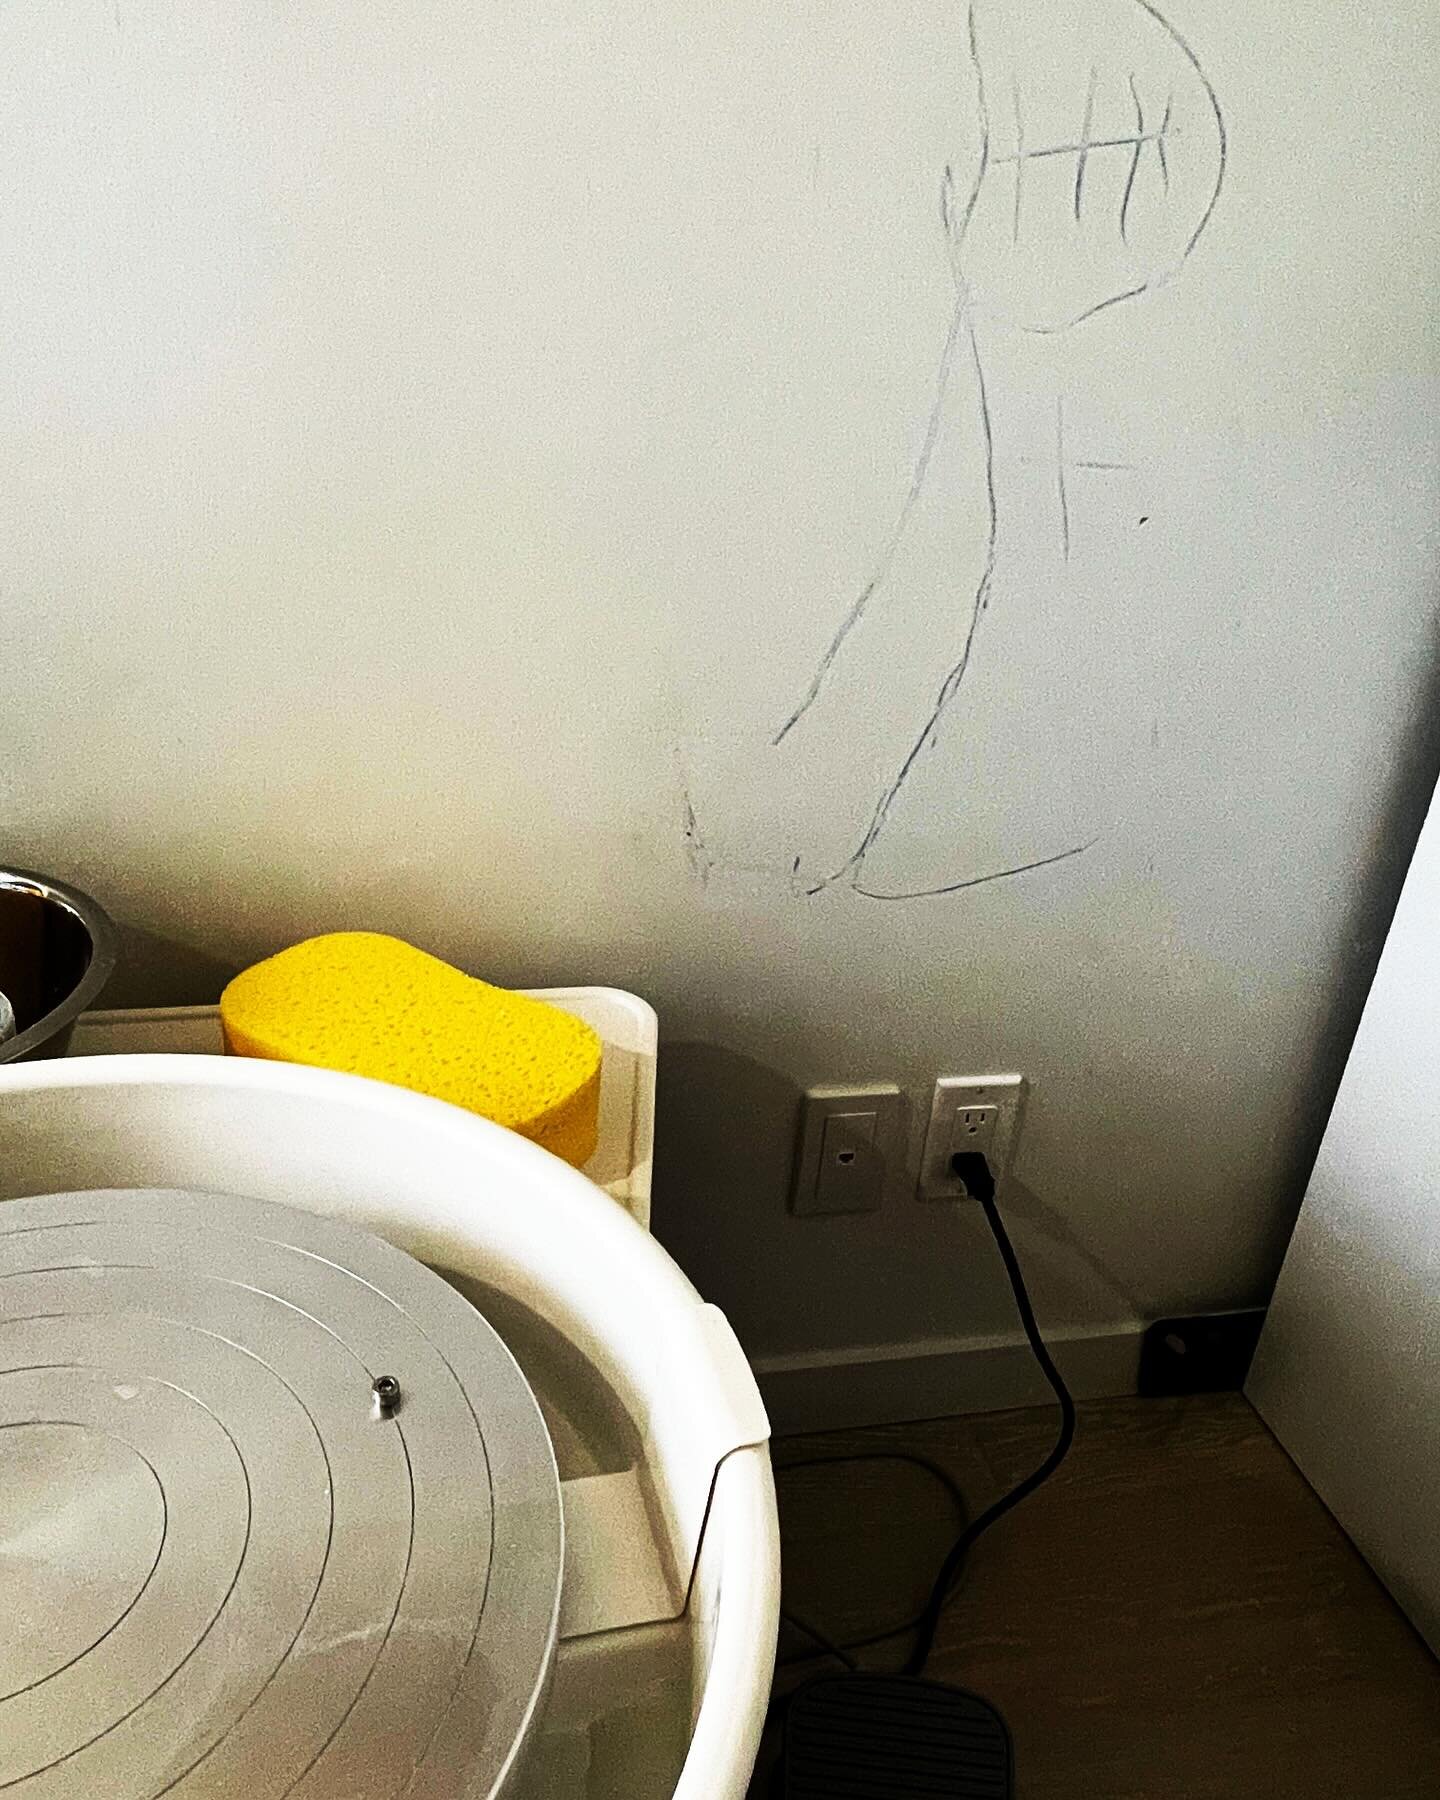 When my home studio used to be a second bedroom, my grandson drew on the wall. I&rsquo;ve kept it there by my wheel to remind me to have fun and be playful when I create (〇&acute;◡`〇) 

I kinda want to trace over it to make it darker. Maybe I should 